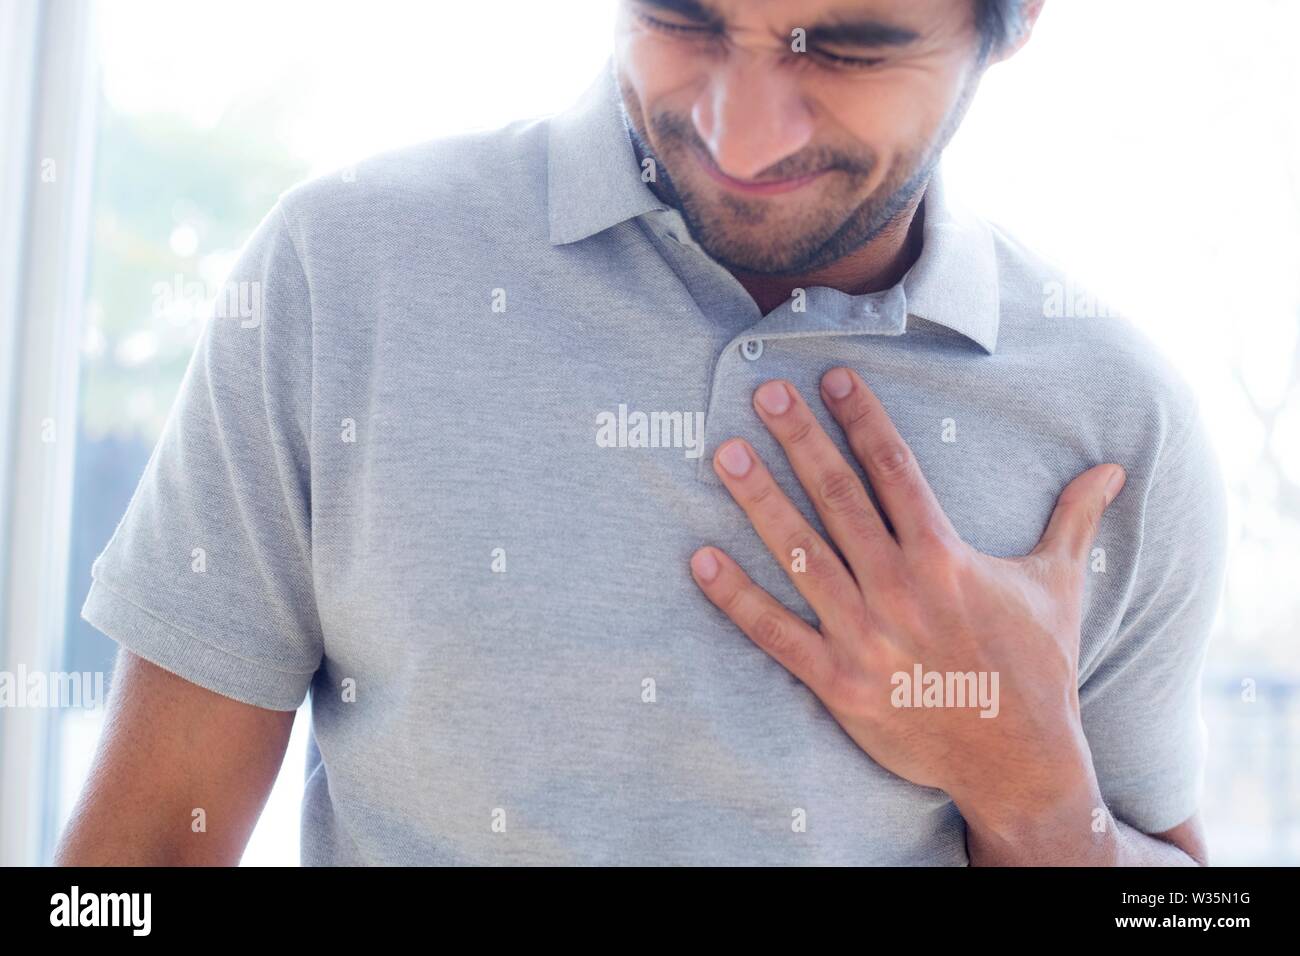 Man touching his chest in pain. Stock Photo